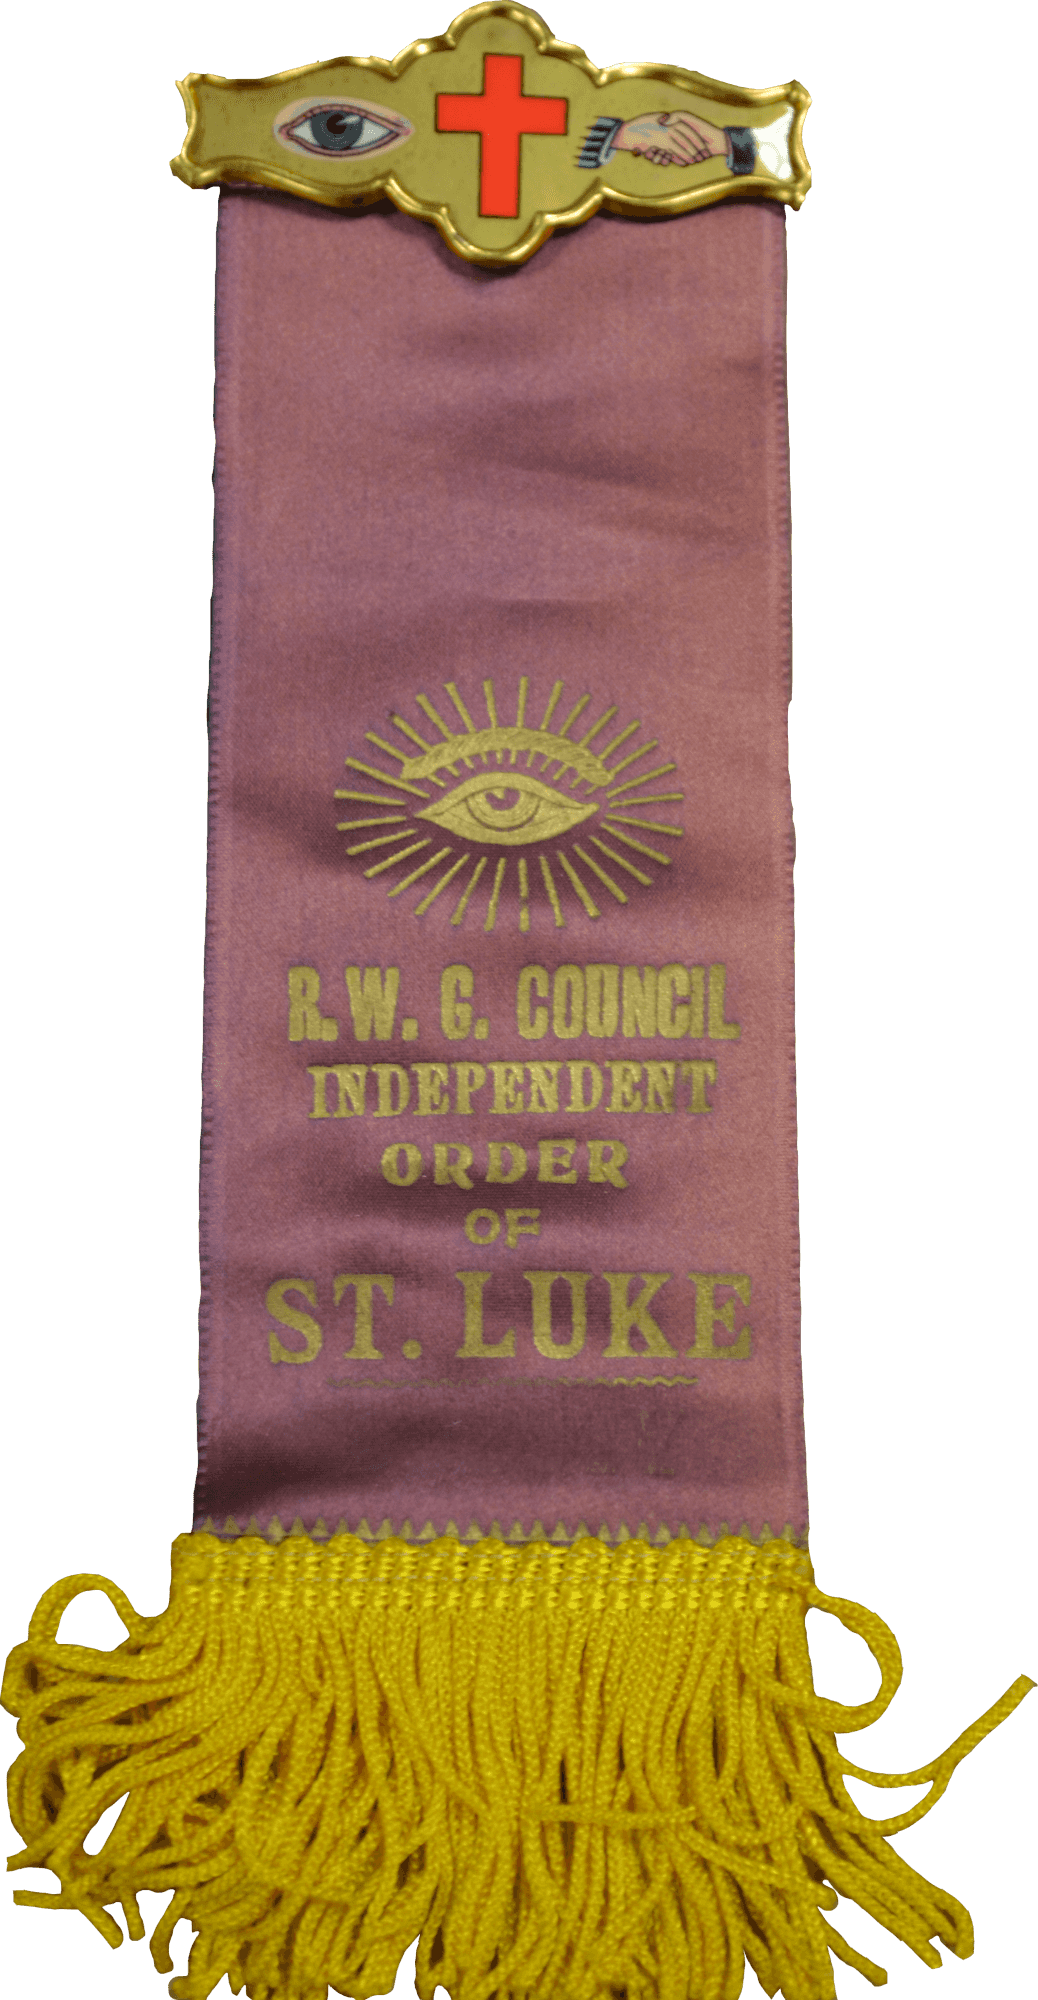 Image of member badge from the Independent Order of St Luke.